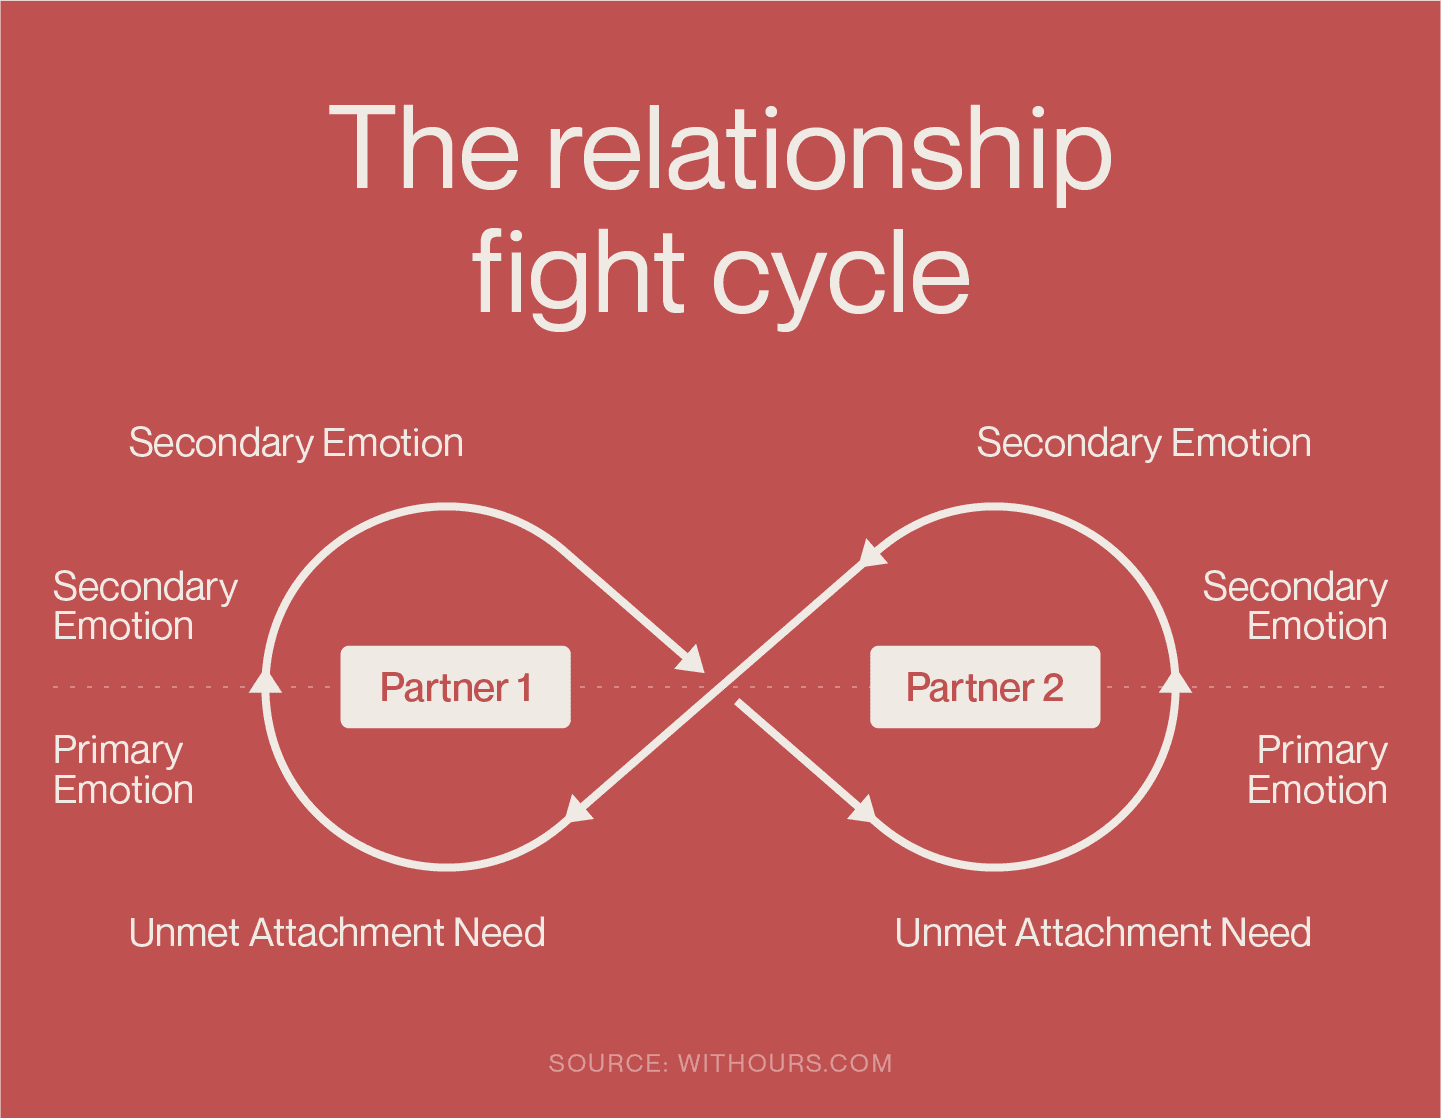 Graphic showing the relationship fight cycle that you learn about in EFT couples therapy.